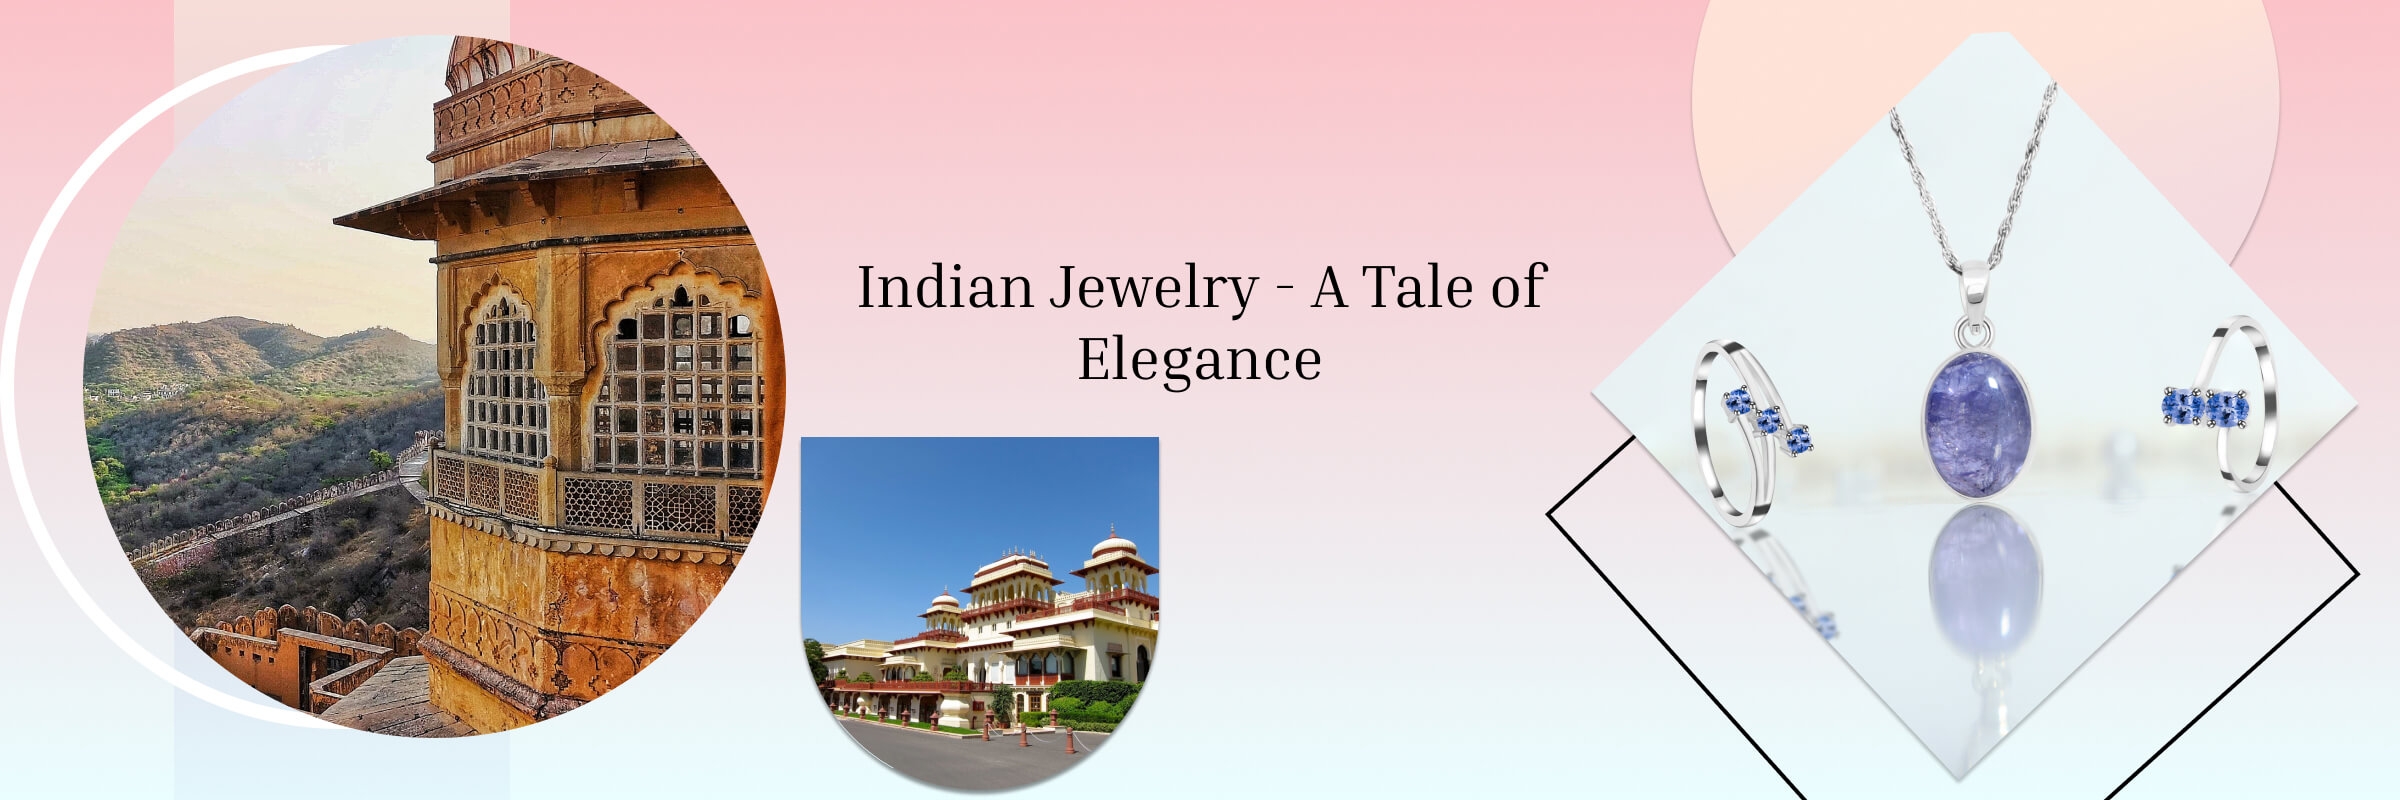 History of Indian Jewelry